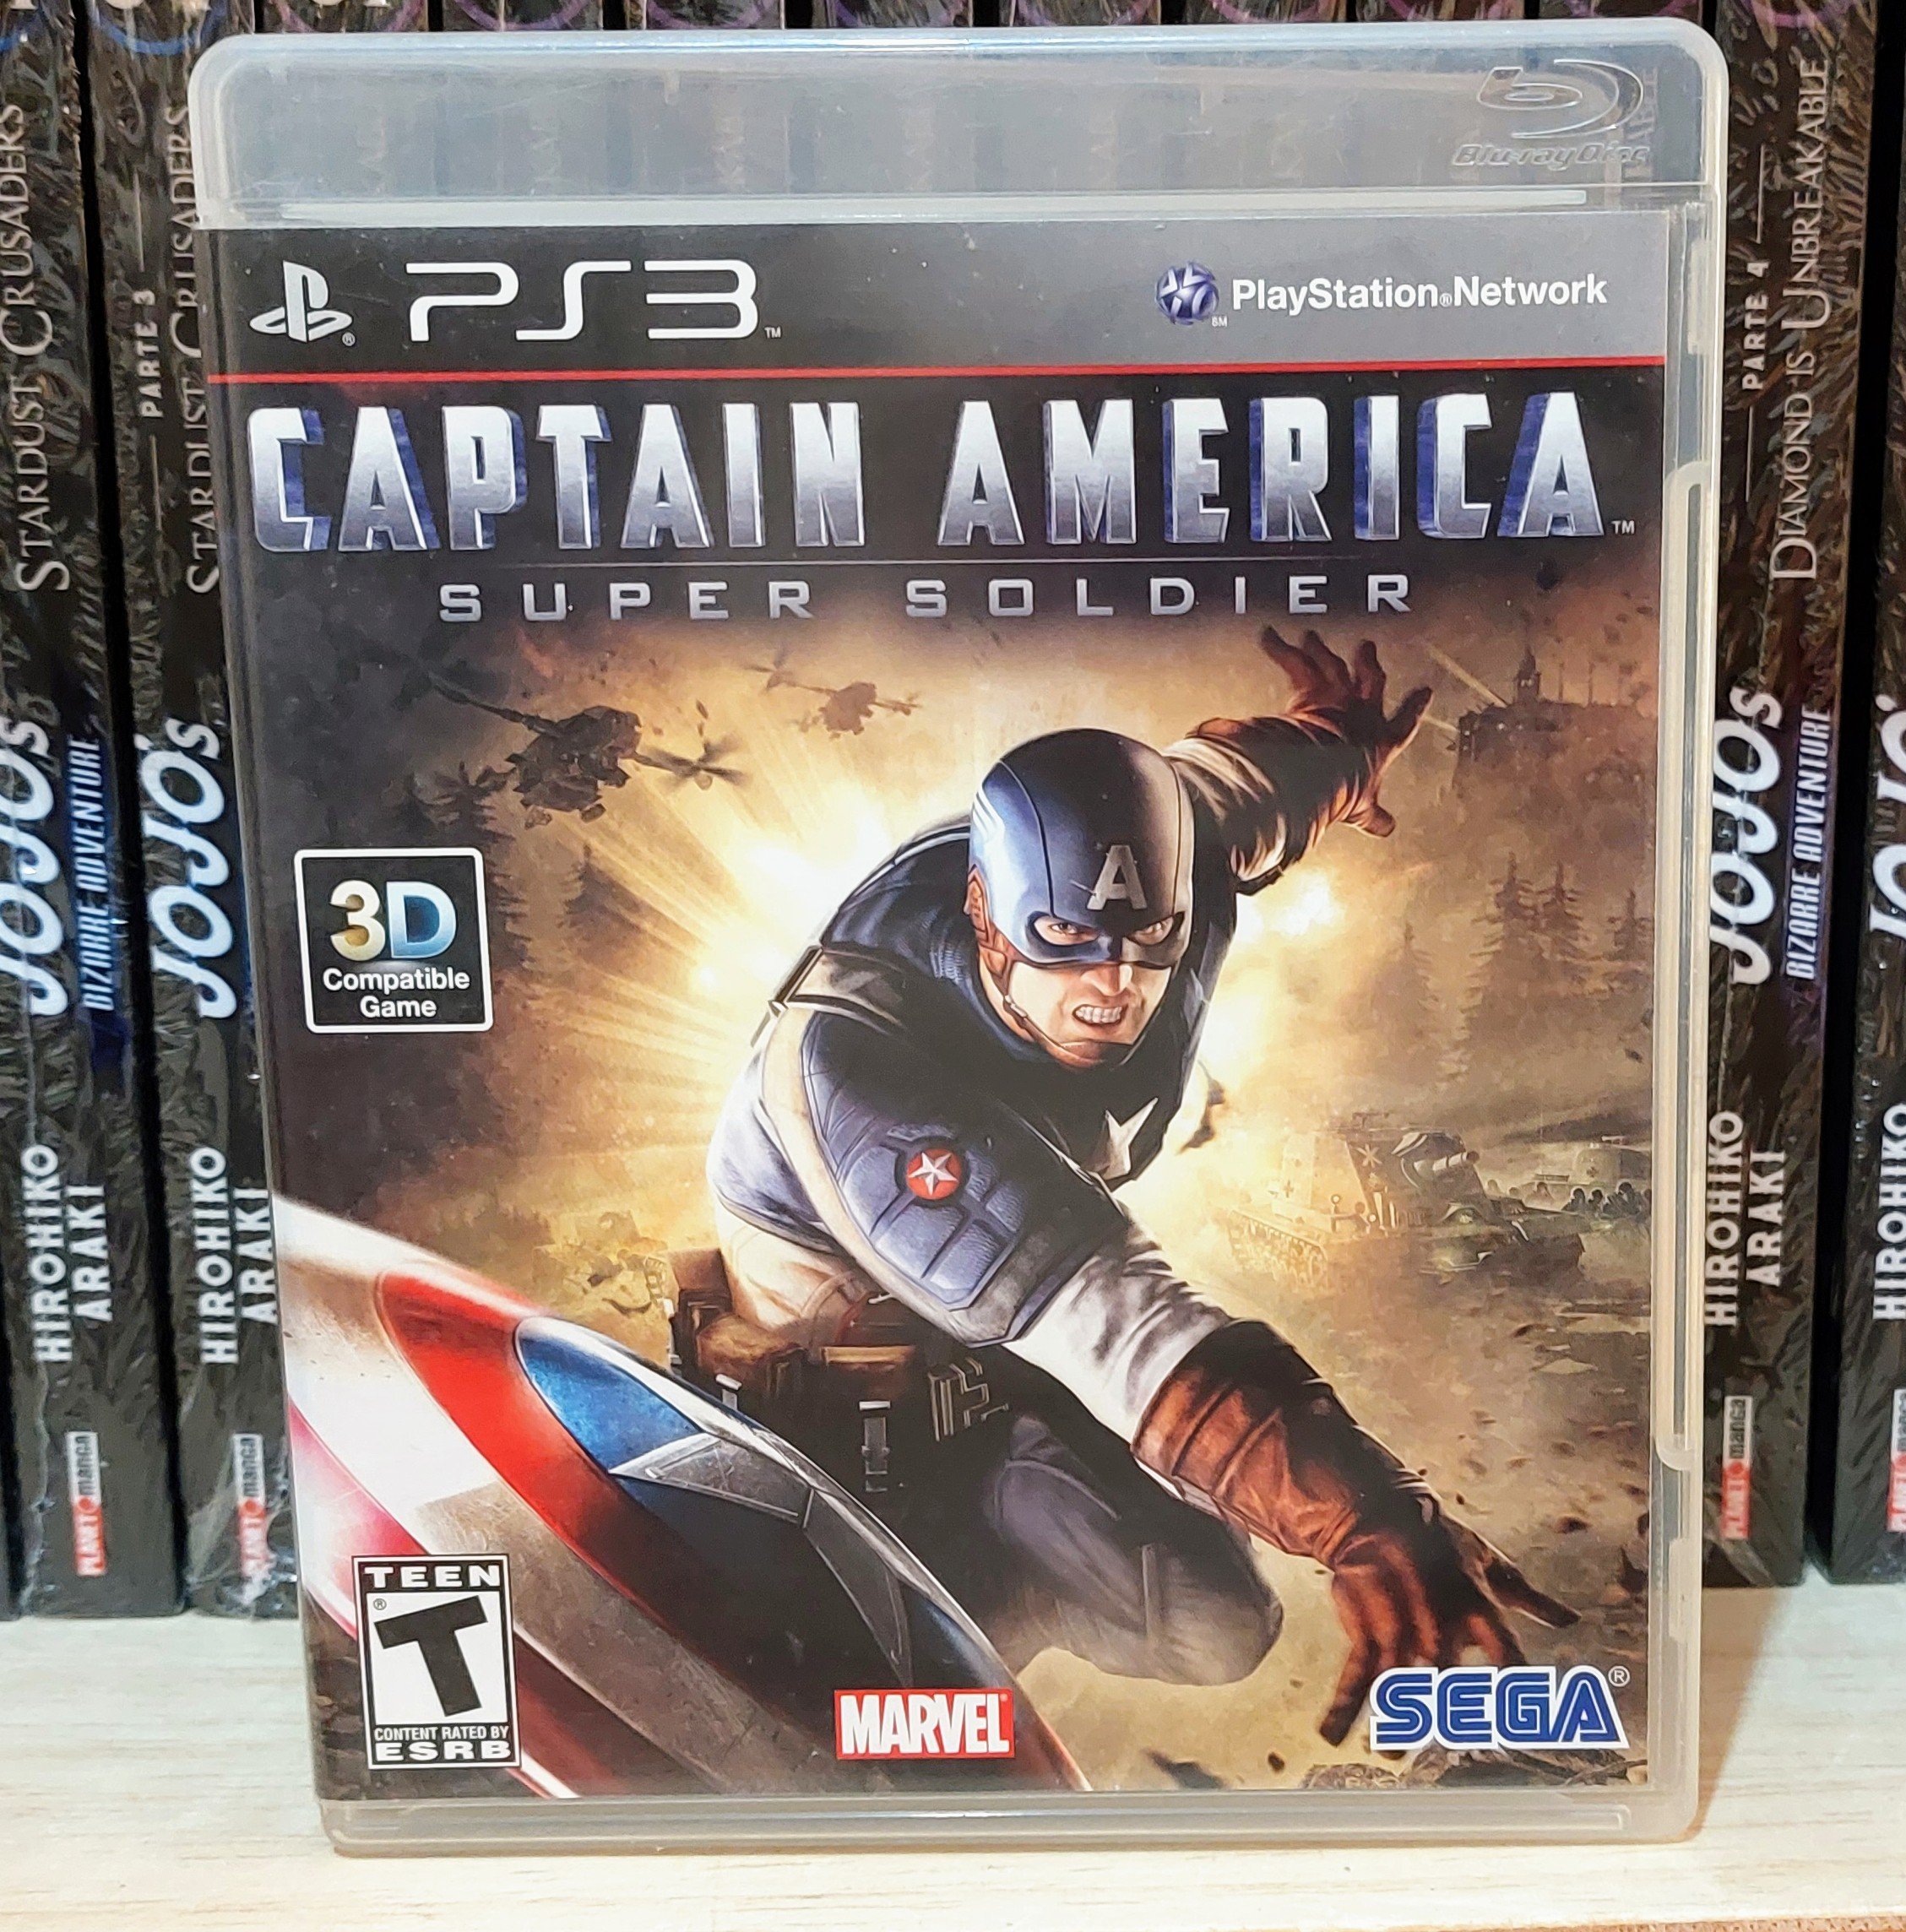 Cinthia Mendes on X: "Platinum 740 - #CaptainAmerica Super Soldier #PS3  @SEGA Time: 11h Difficulty: 2/10 Super fun game and still plays very well  after 11 years. Would love to have a